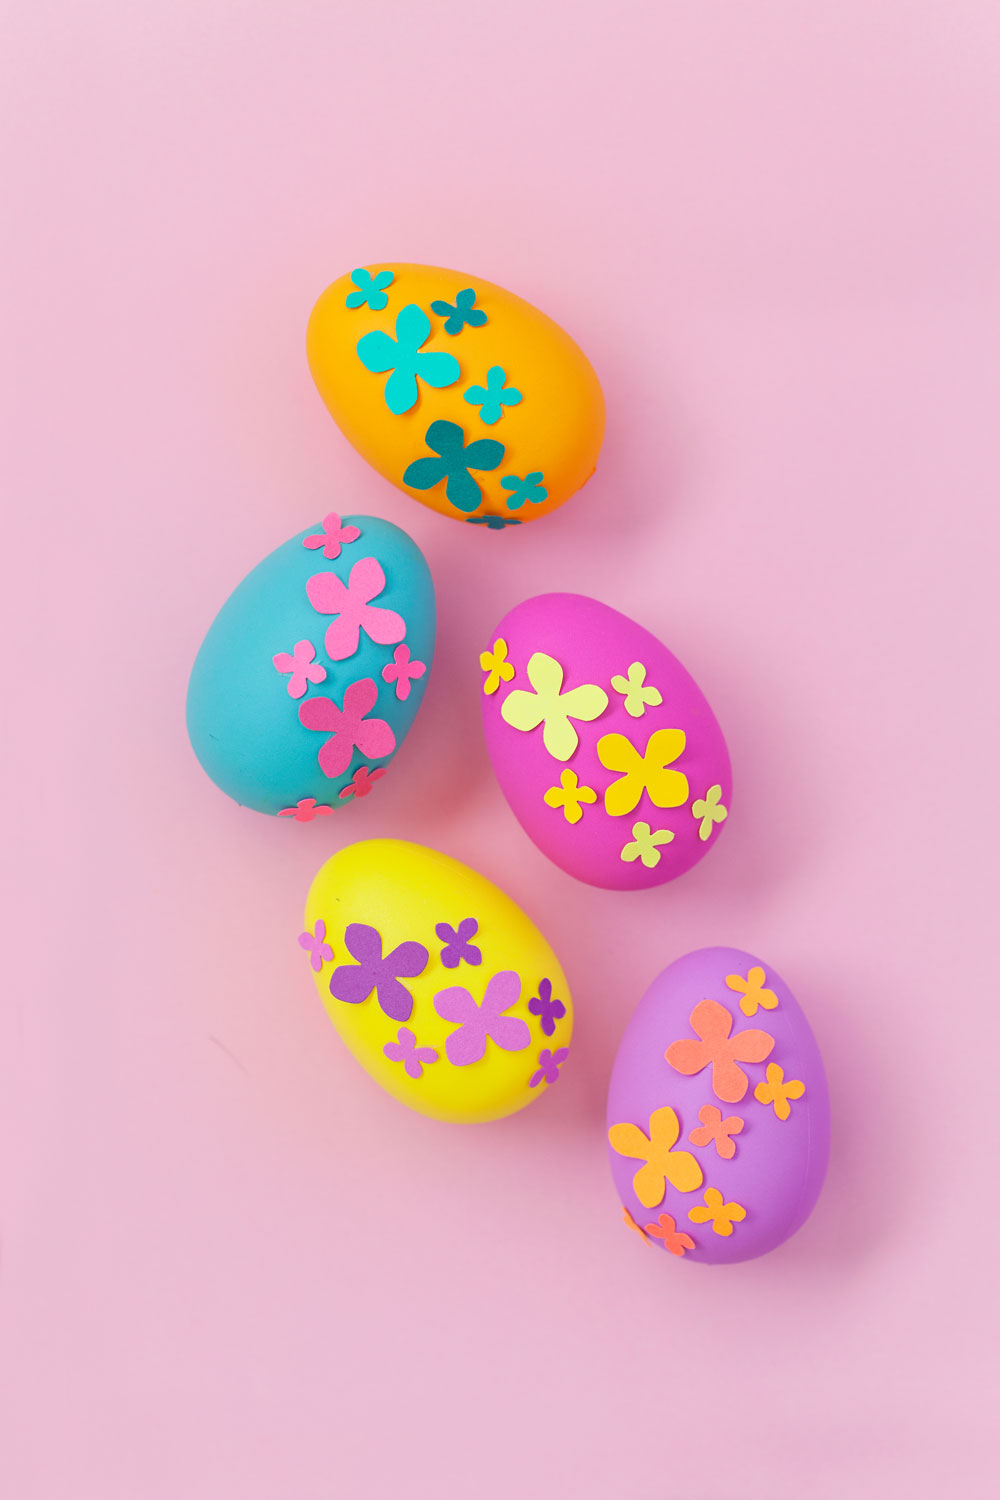 Eggs decorated with paper flowers.